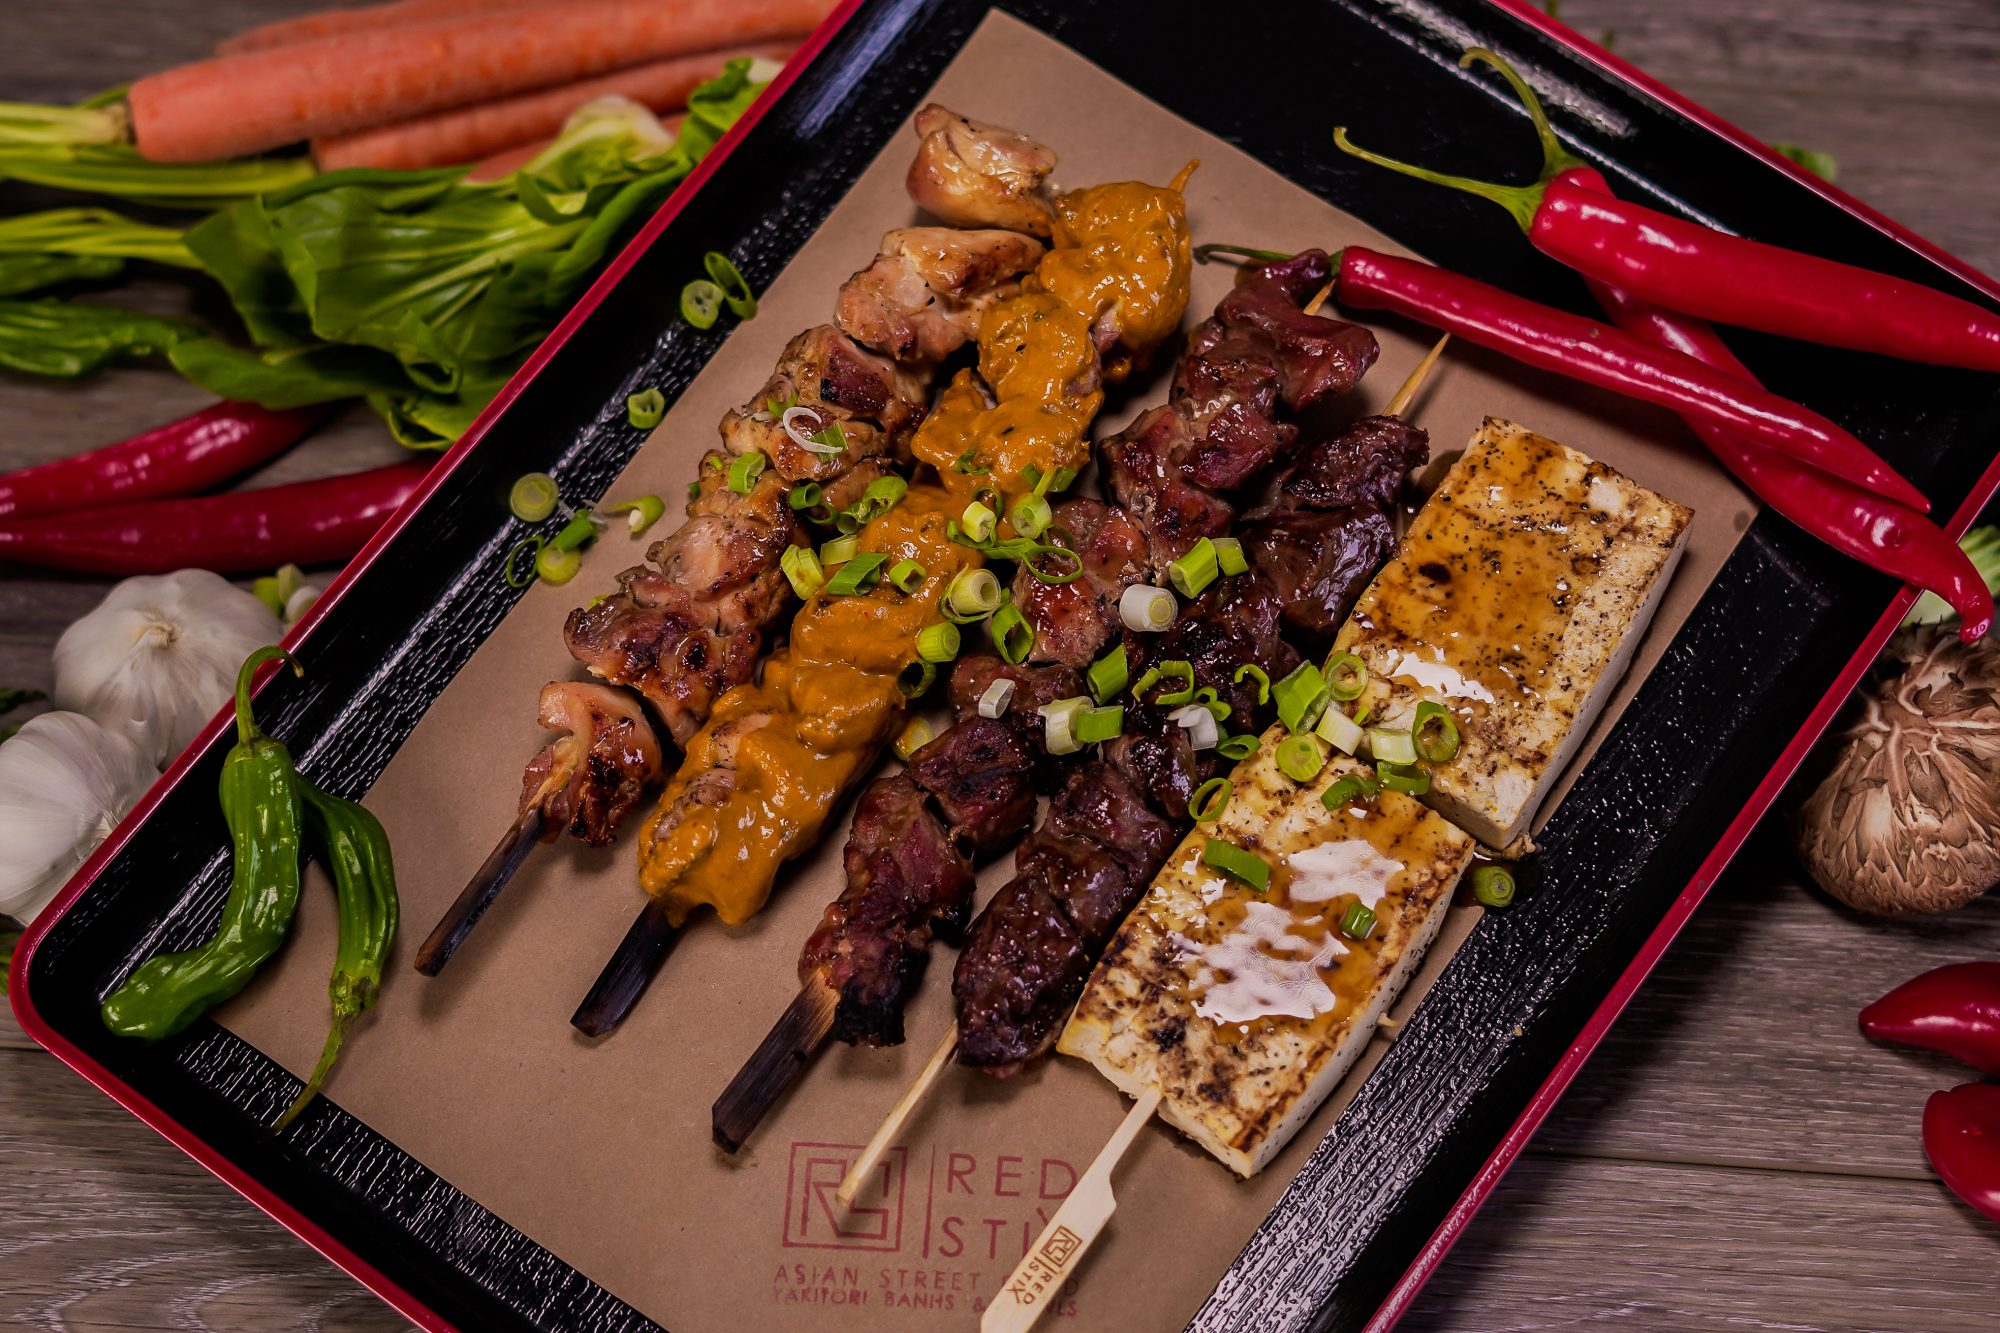 Chef Uno's newest restaurant, Red Stix, seeks to captures the sight, smell and taste of Asian street food; it’s a culmination of Chef Uno’s childhood memories and travels. Each hand-crafted bowl or sandwich is finished with a yakitori stick.